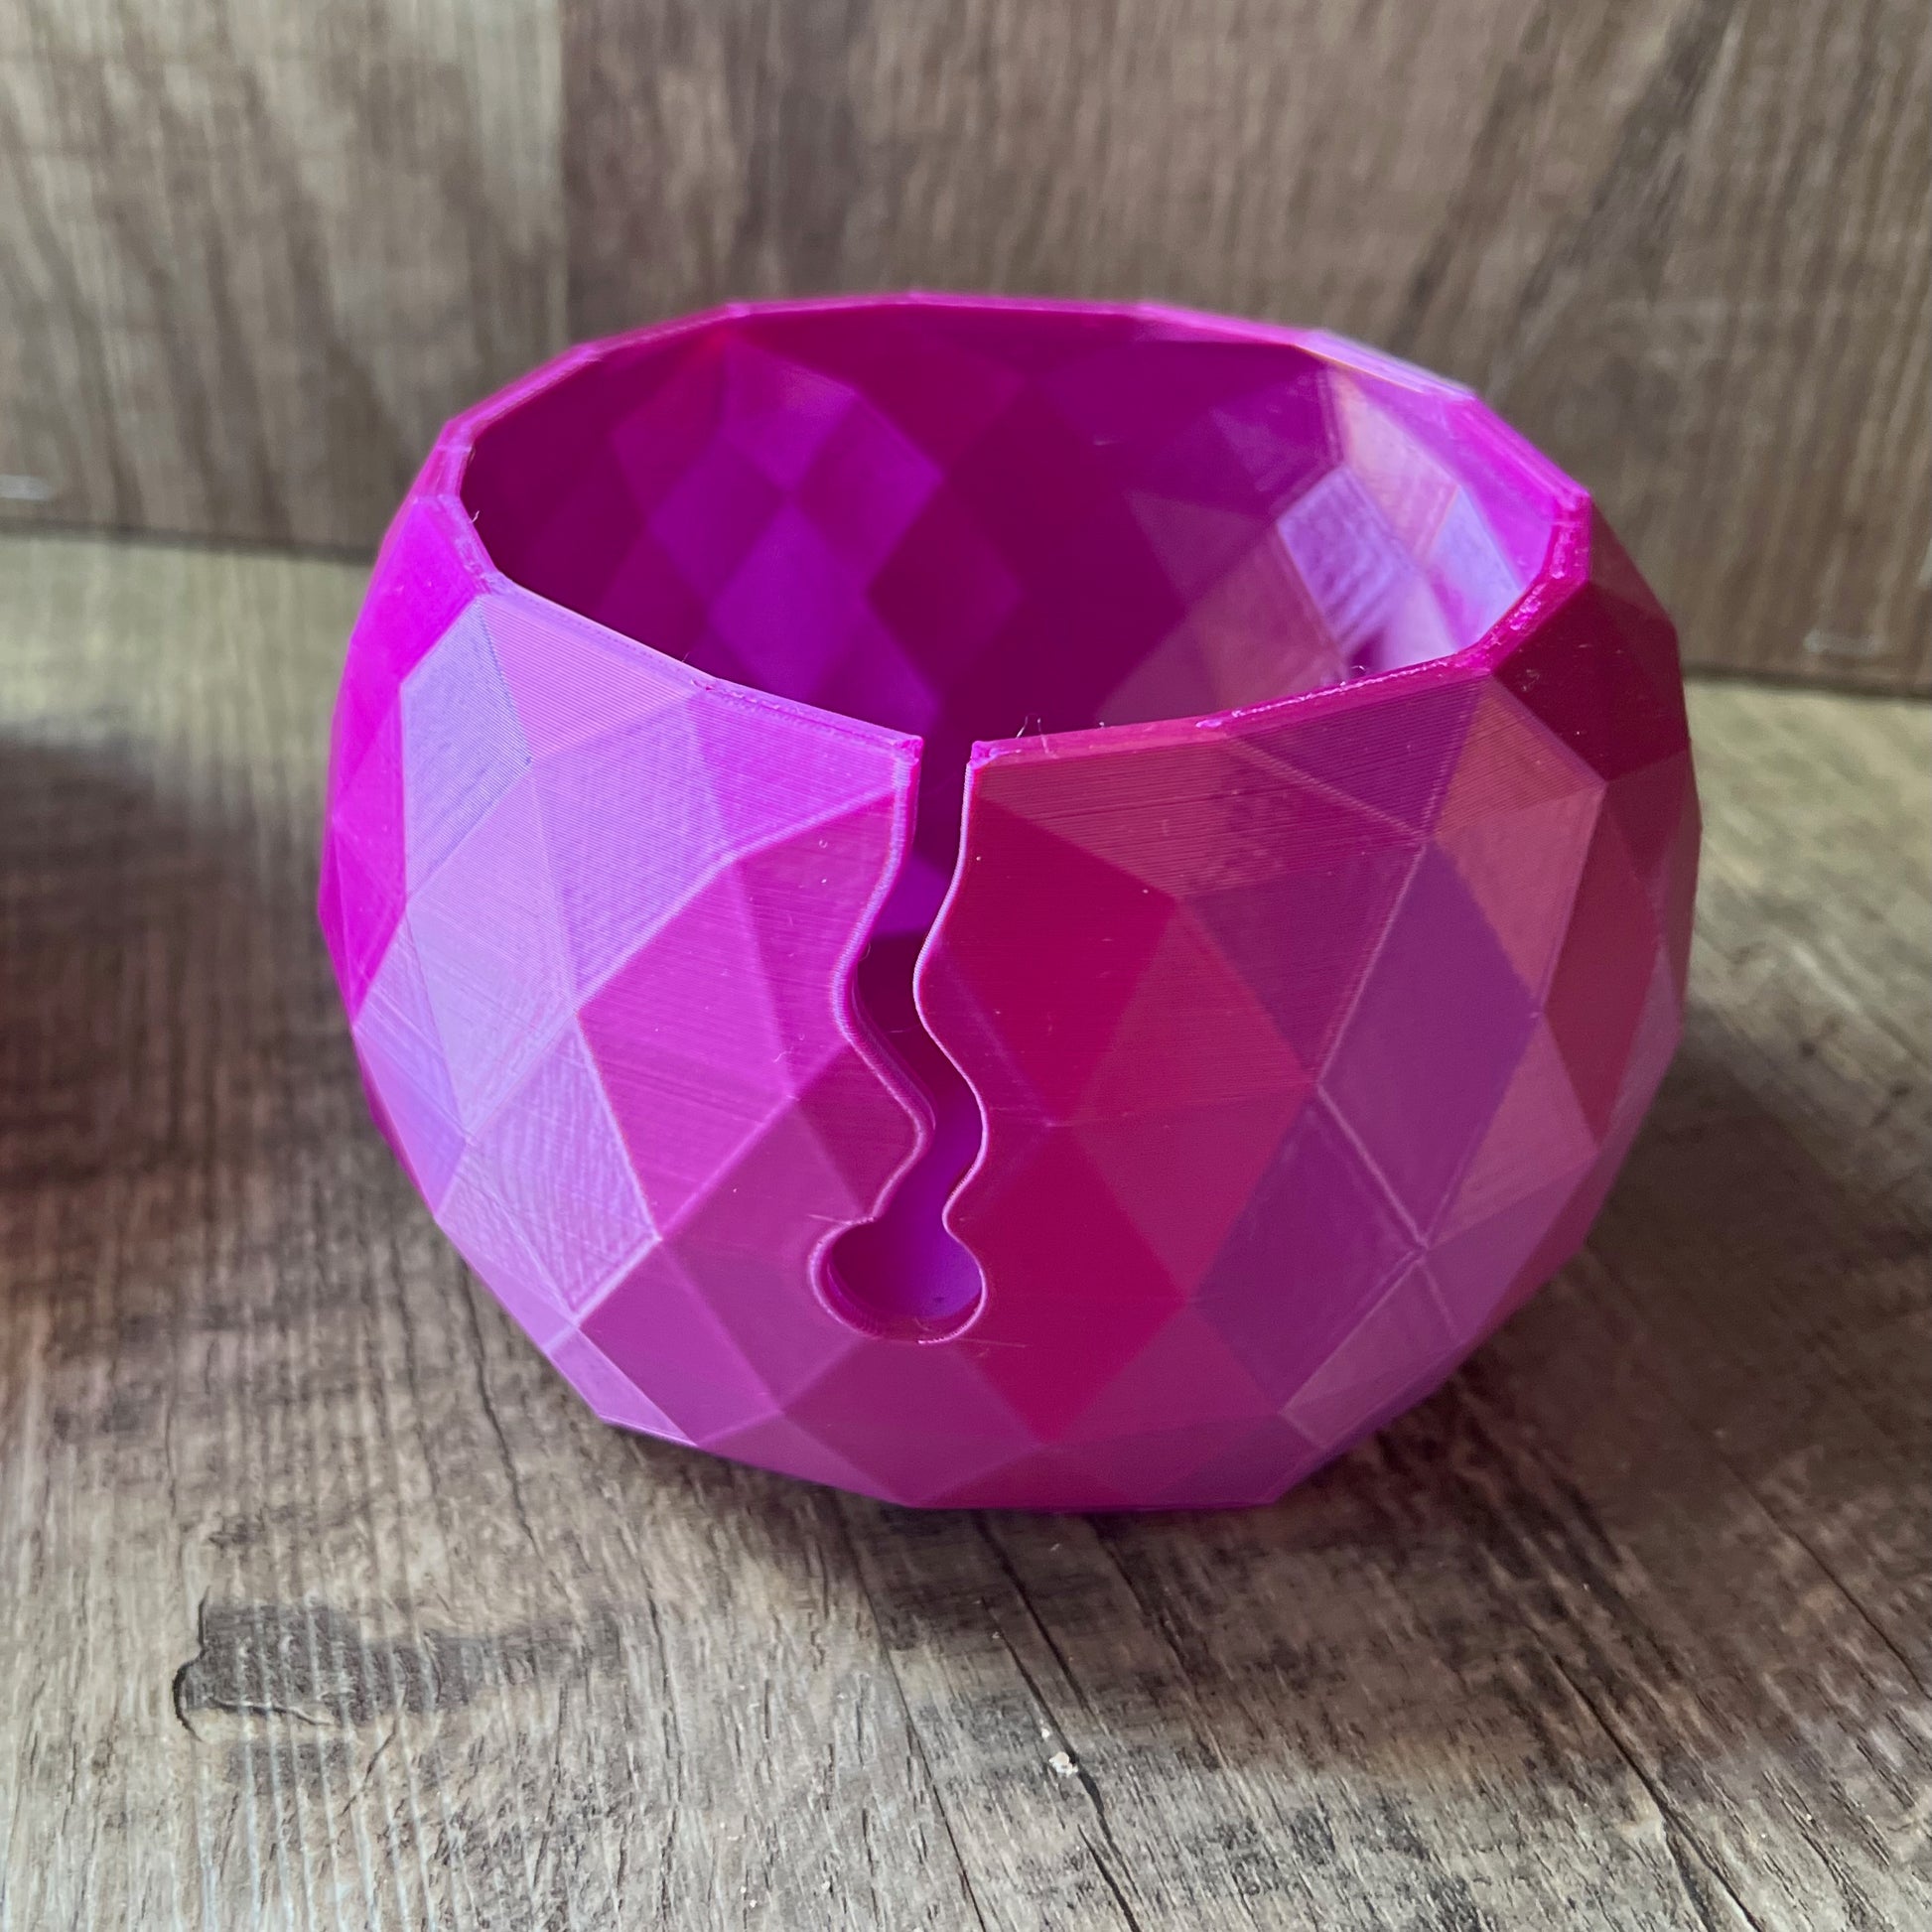 knit - life's too short to buy cheap yarn - Yarn Bowl - 6 in.